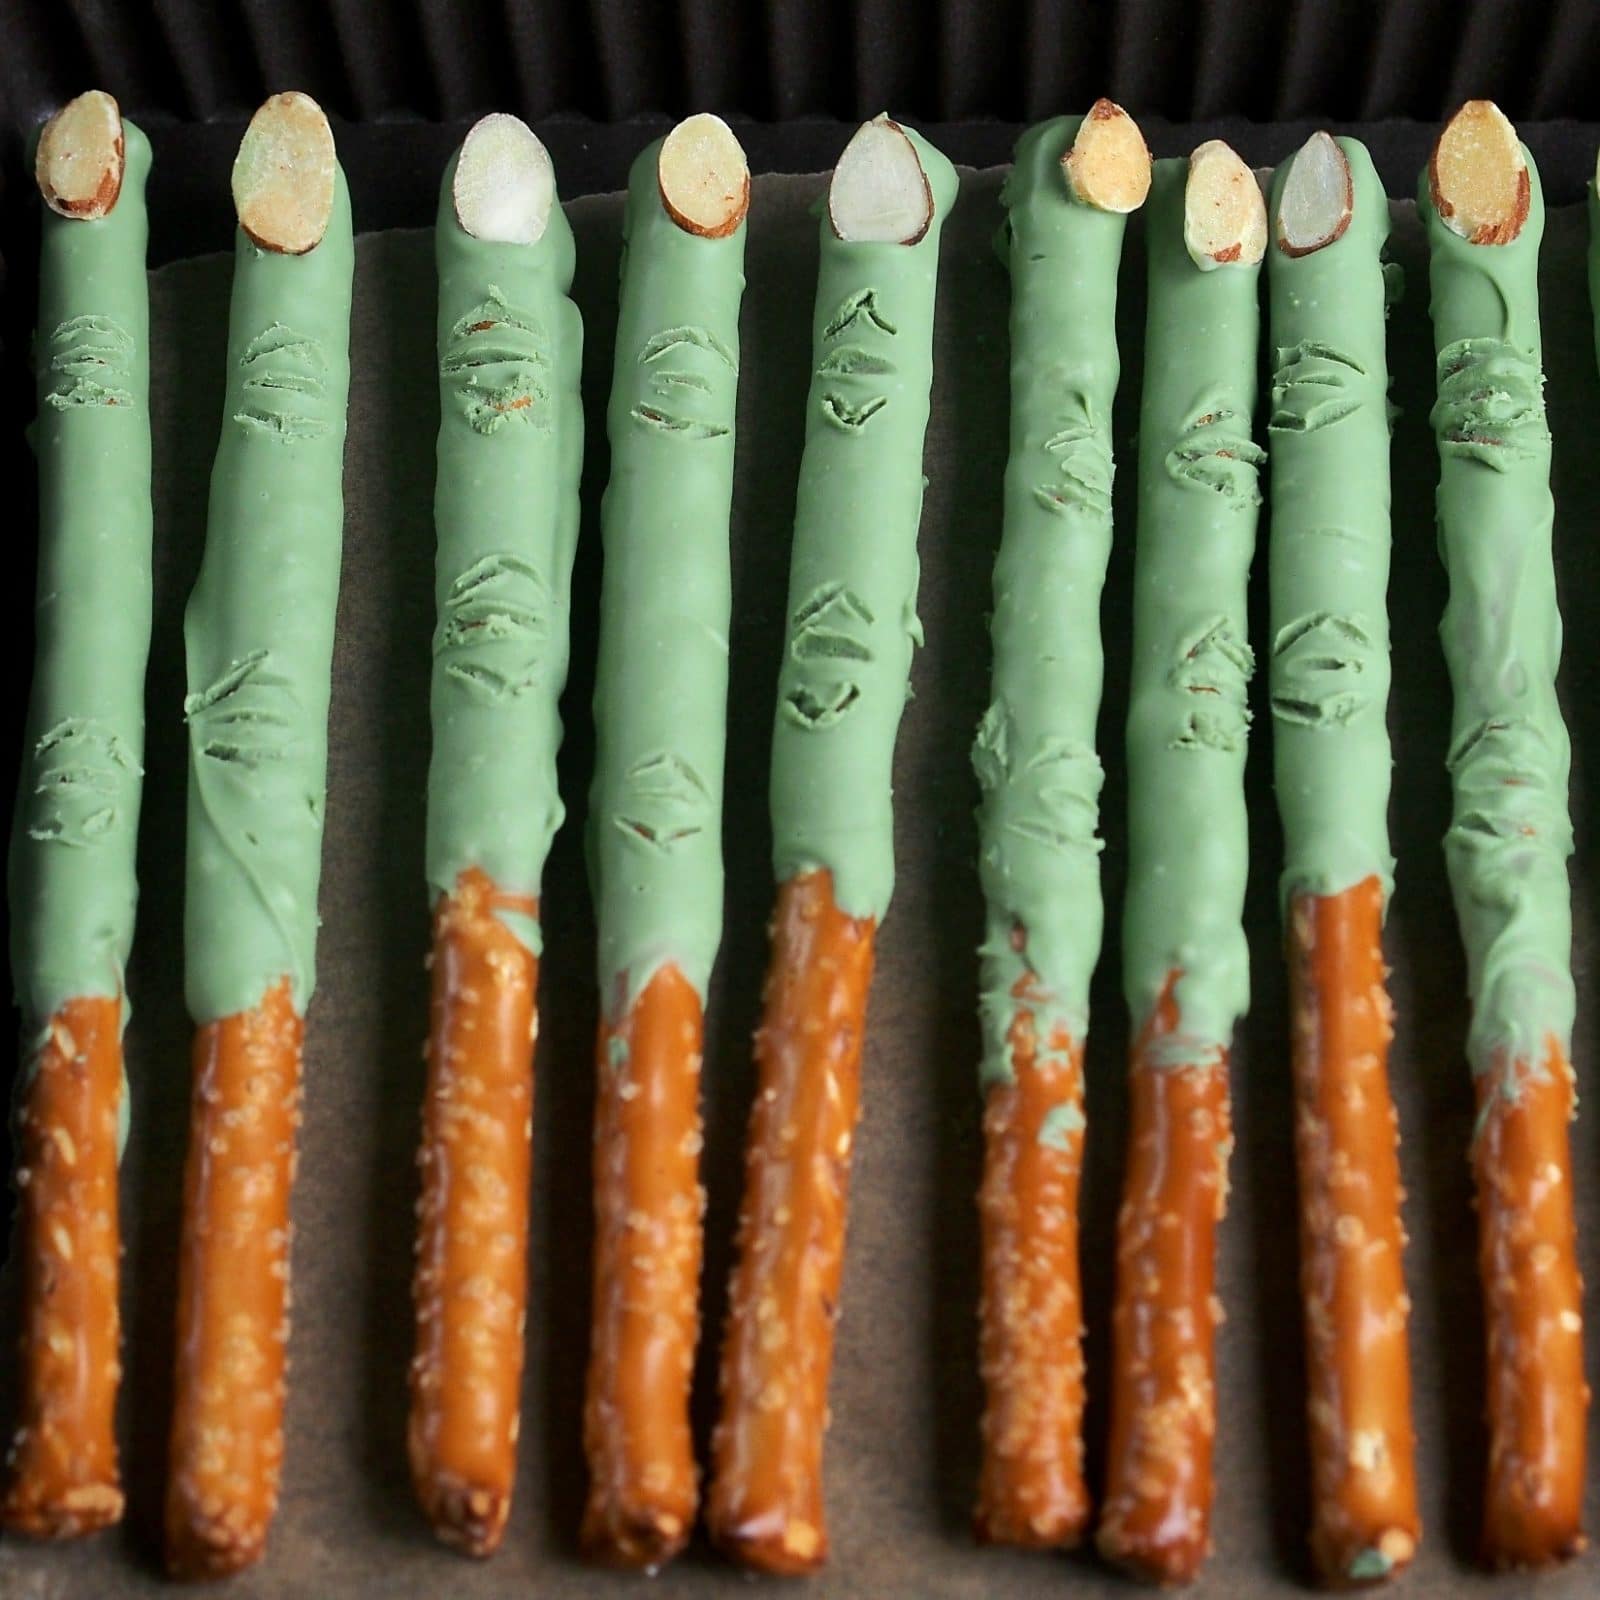 Witch pretzel fingers with green frosting and almonds